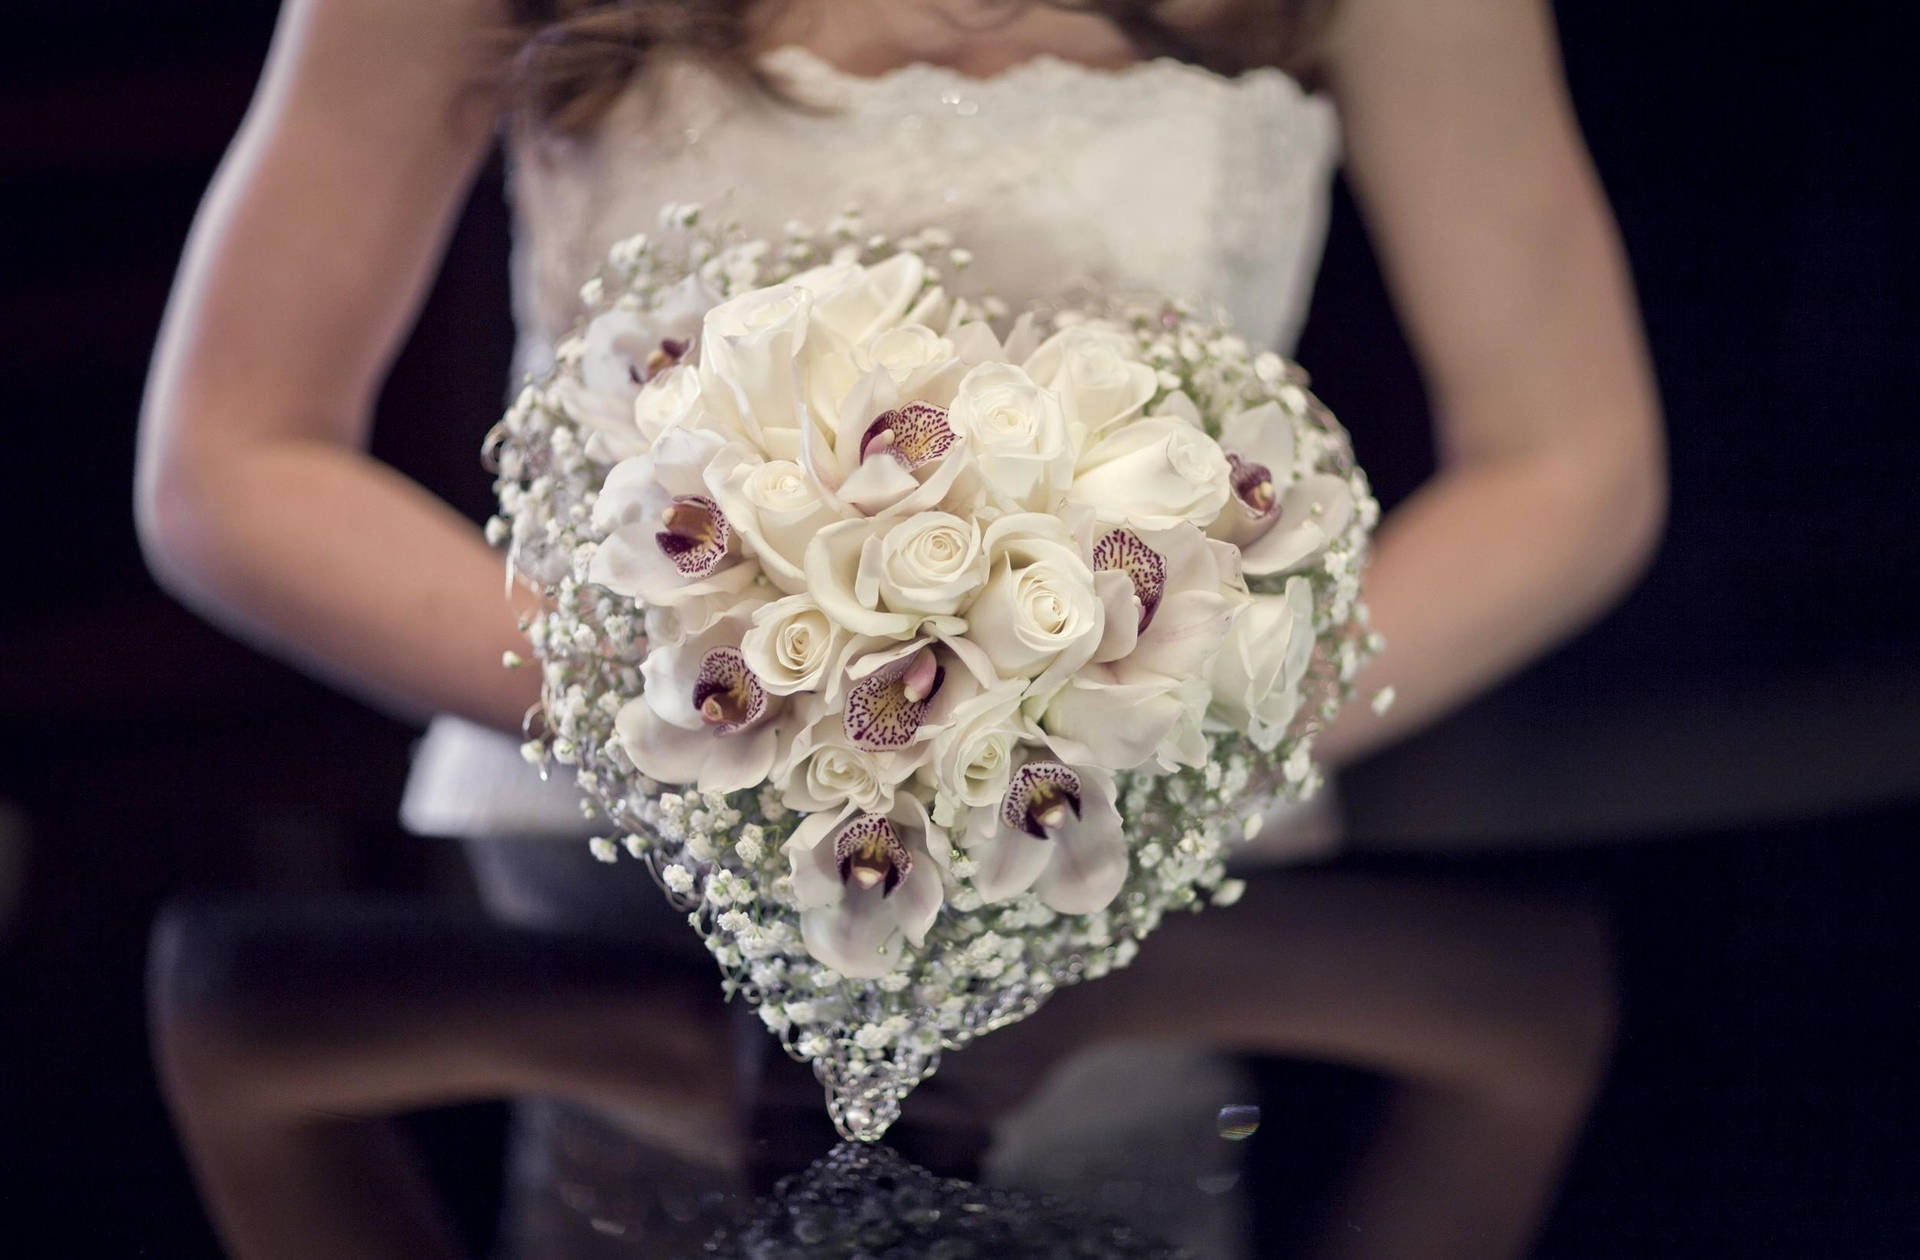 Bride With Heart Roses Bouquet Background